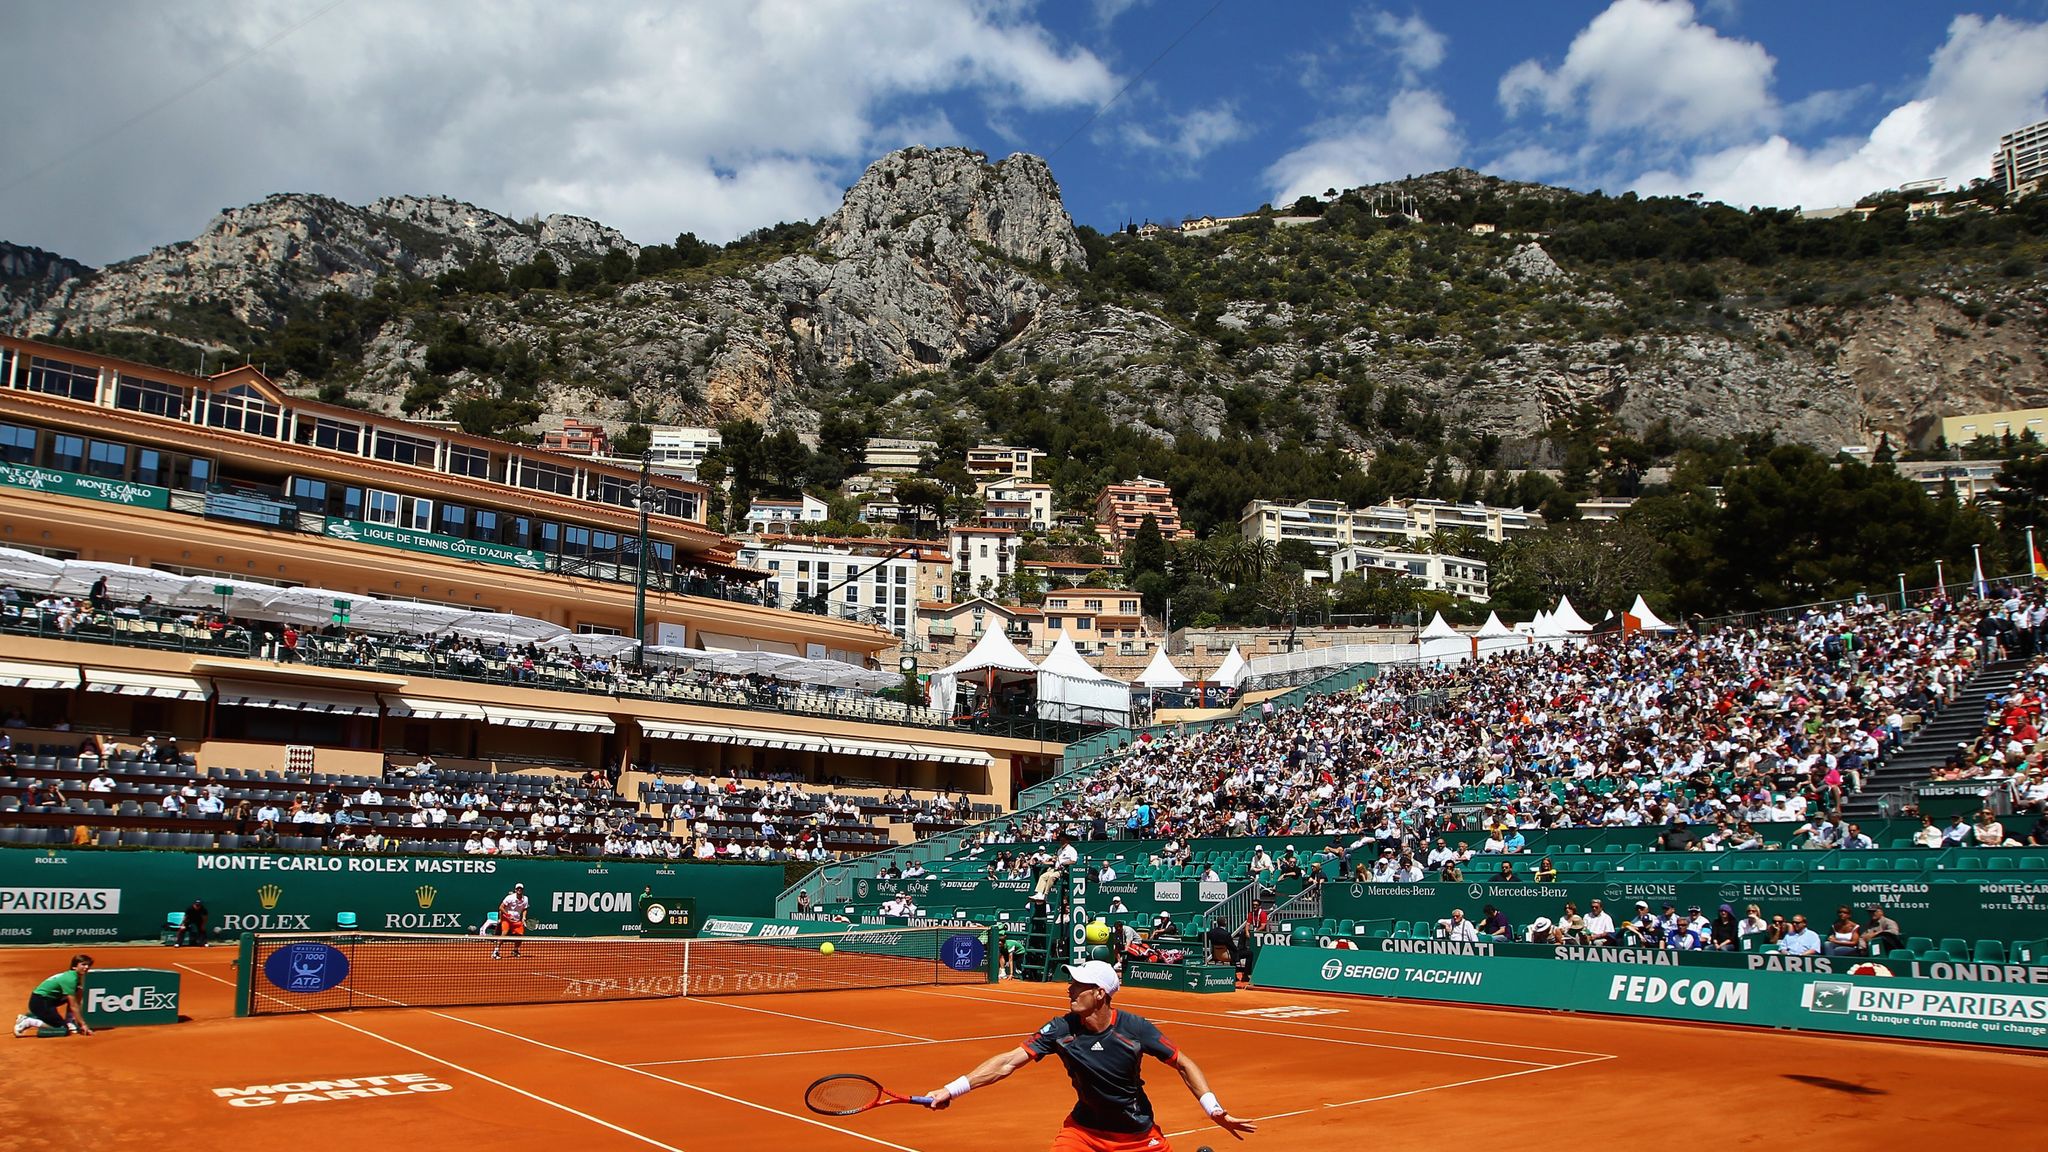 Andy Murray, Novak Djokovic and Rafa Nadal must answer questions at Monte Carlo Masters Tennis News Sky Sports